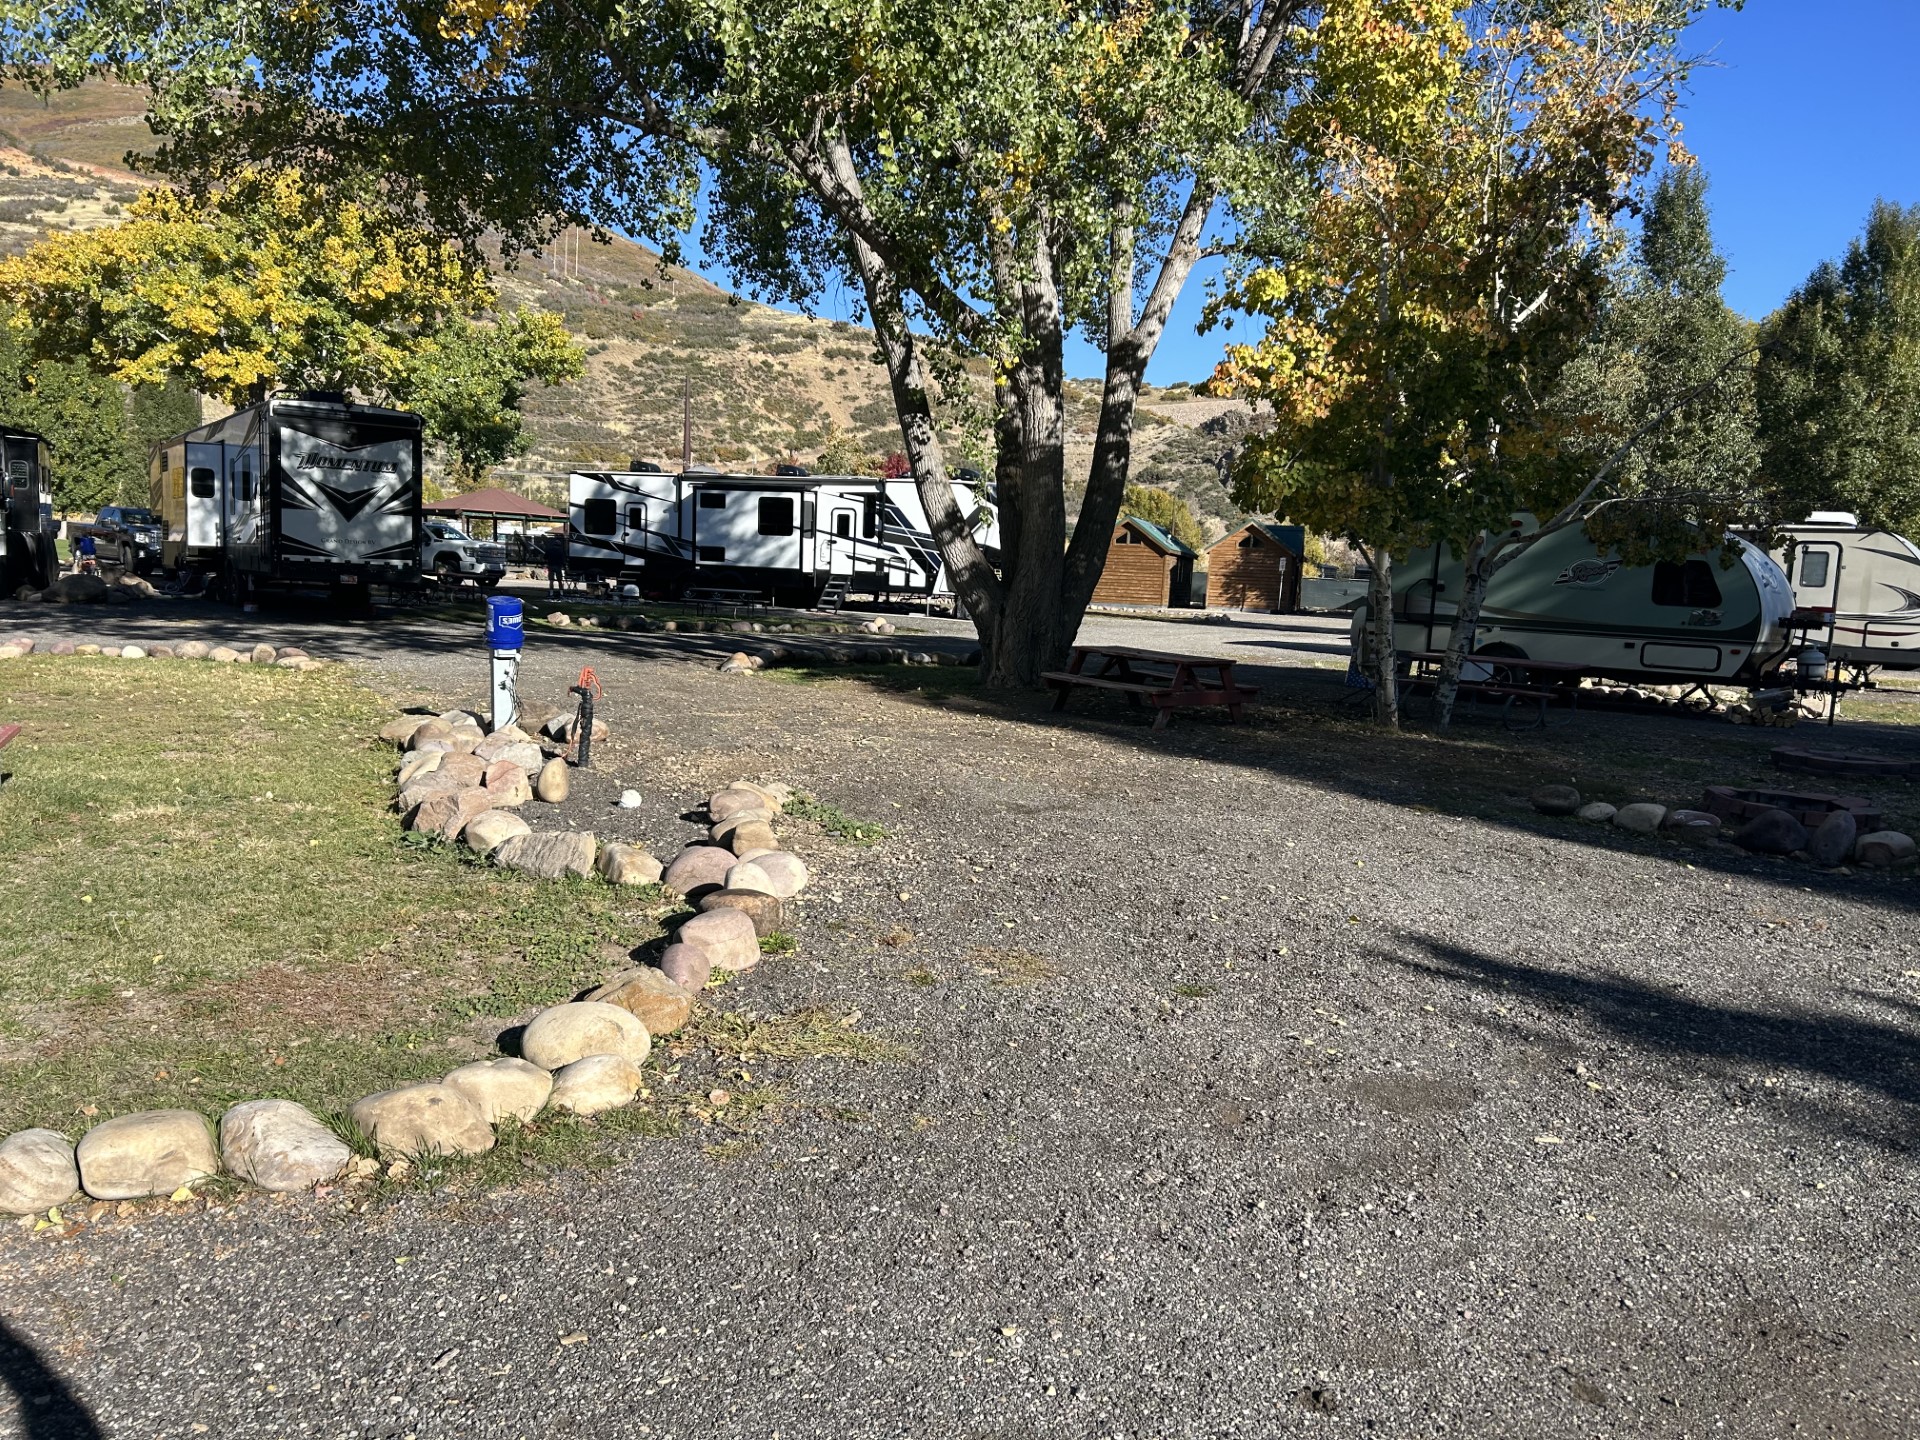 Bunk beds at Rivers Edge Campground near Heber Valley, UT